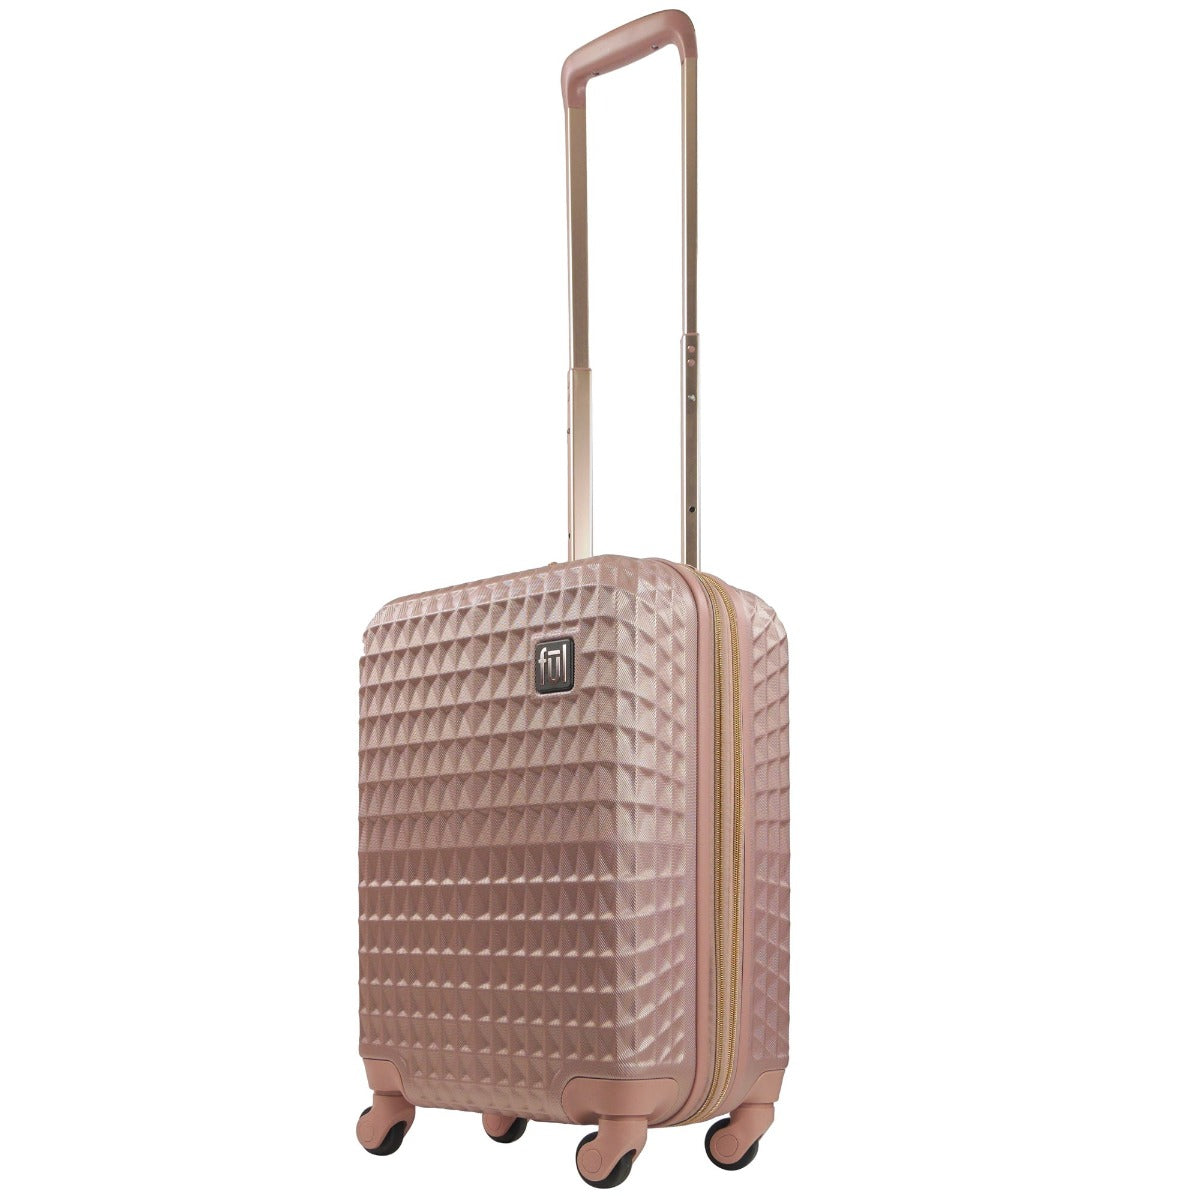 Ful Geo 22" carry on hard sided expandable spinner suitcase rose gold luggage